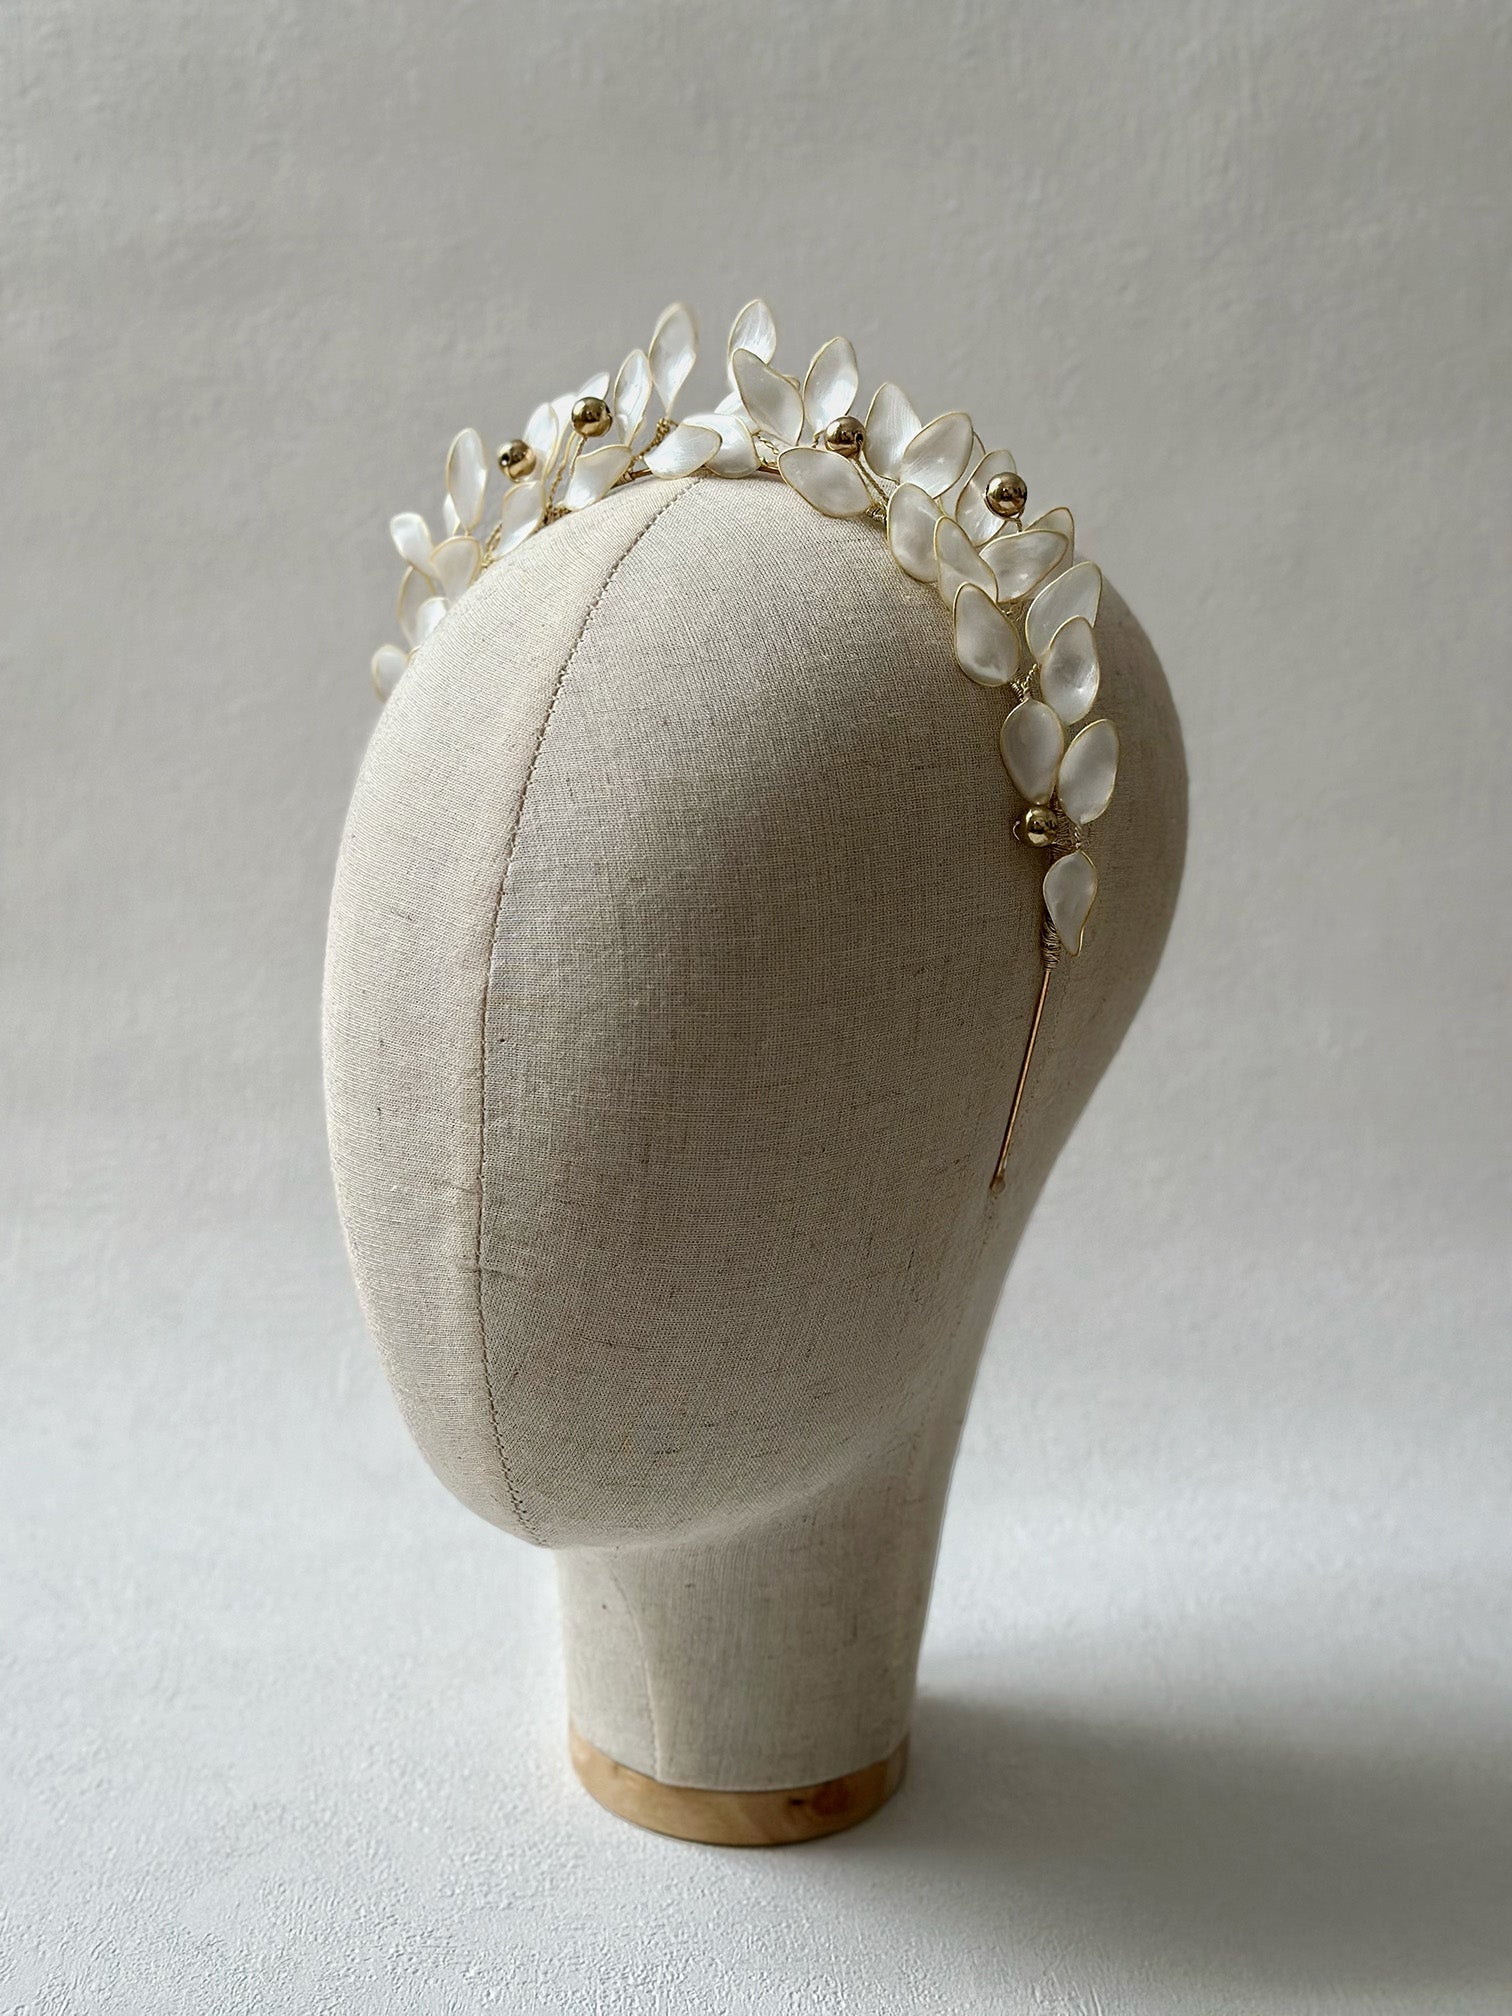 The Olea Tiara, with its epoxy-crafted, pearly white leaves resembling an olive branch, combines timeless elegance with modern aesthetics. Golden bead accents enhance its ethereal glow, offering a secure, graceful fit for bridal or sophisticated wear. A symbol of peace in a luxurious headpiece.